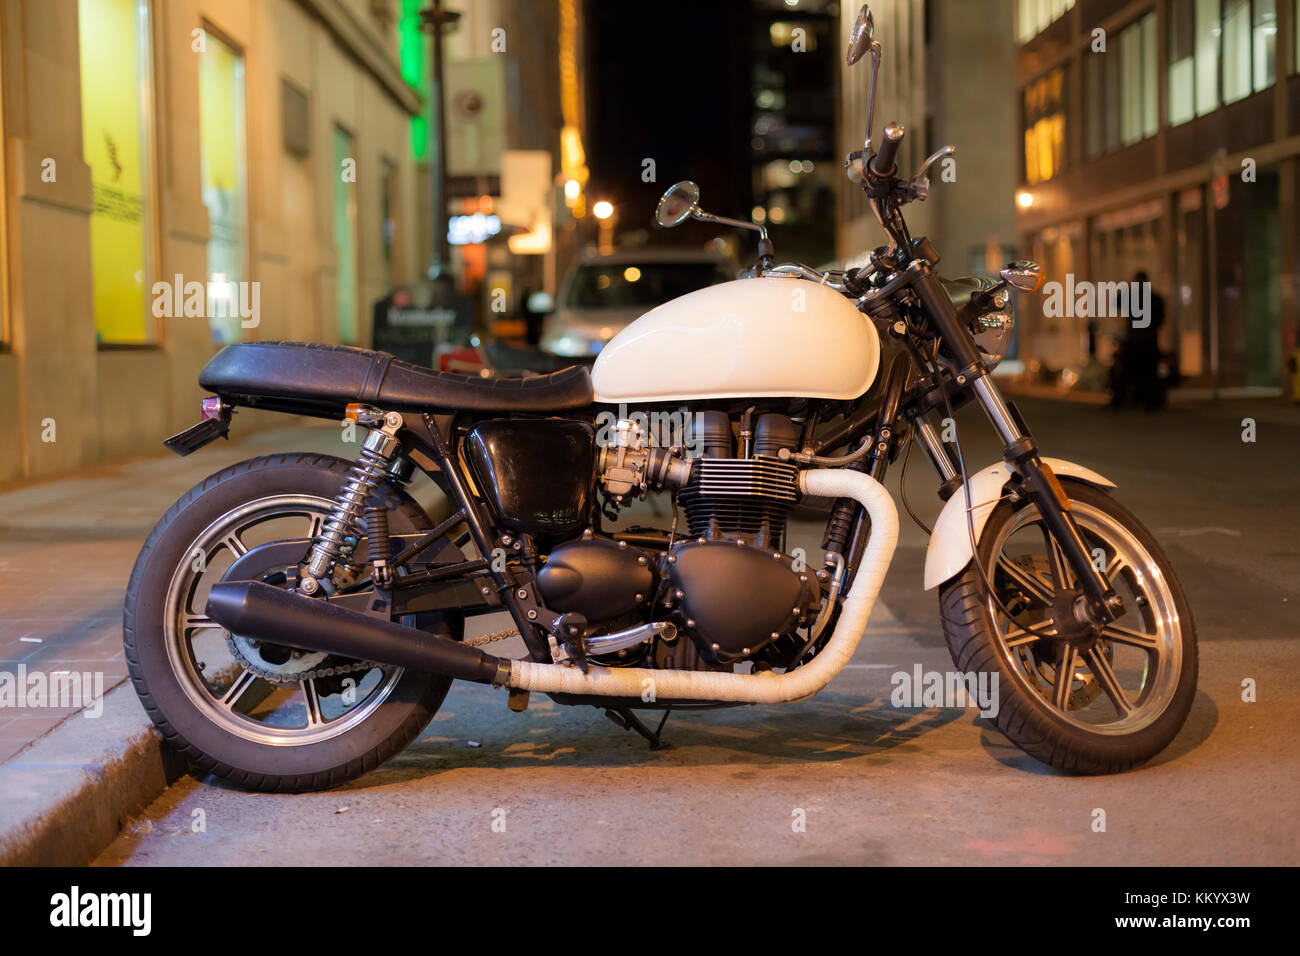 Classic motorcycle parked in a city street at night Stock Photo